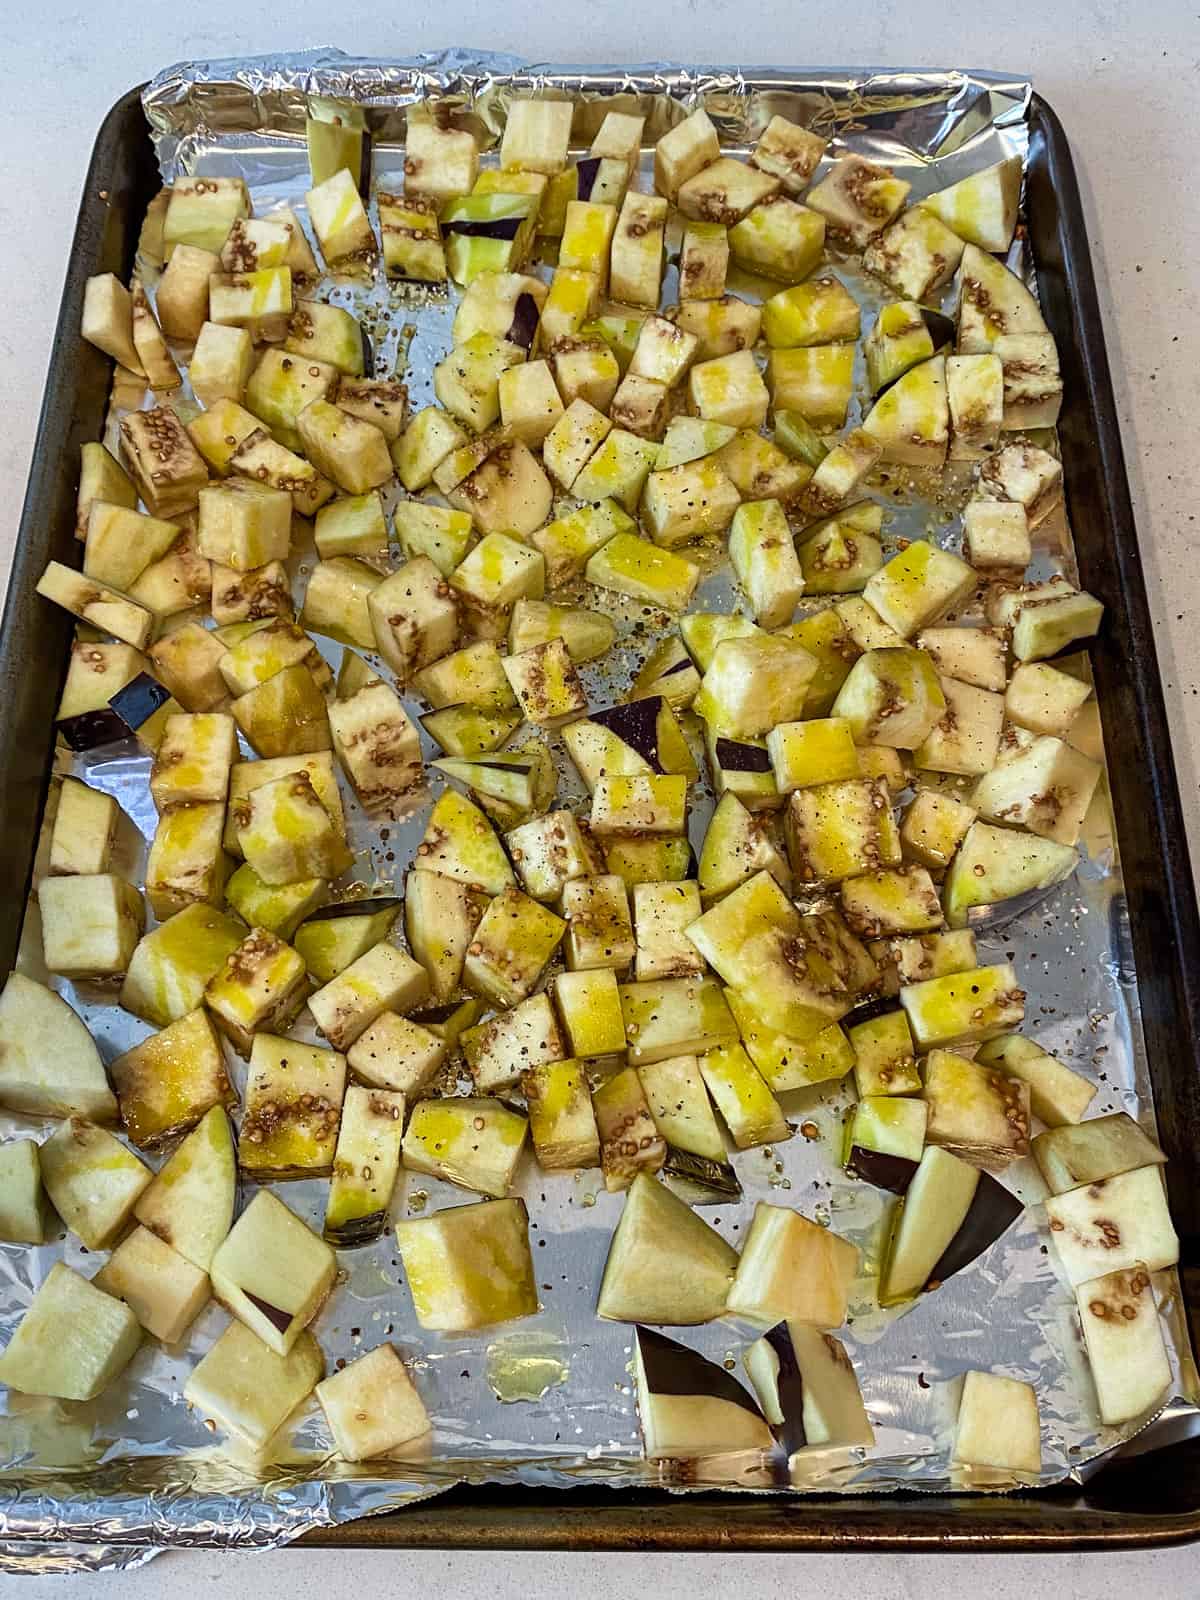 Add the cubed eggplant to a baking sheet and drizzle with olive oil.